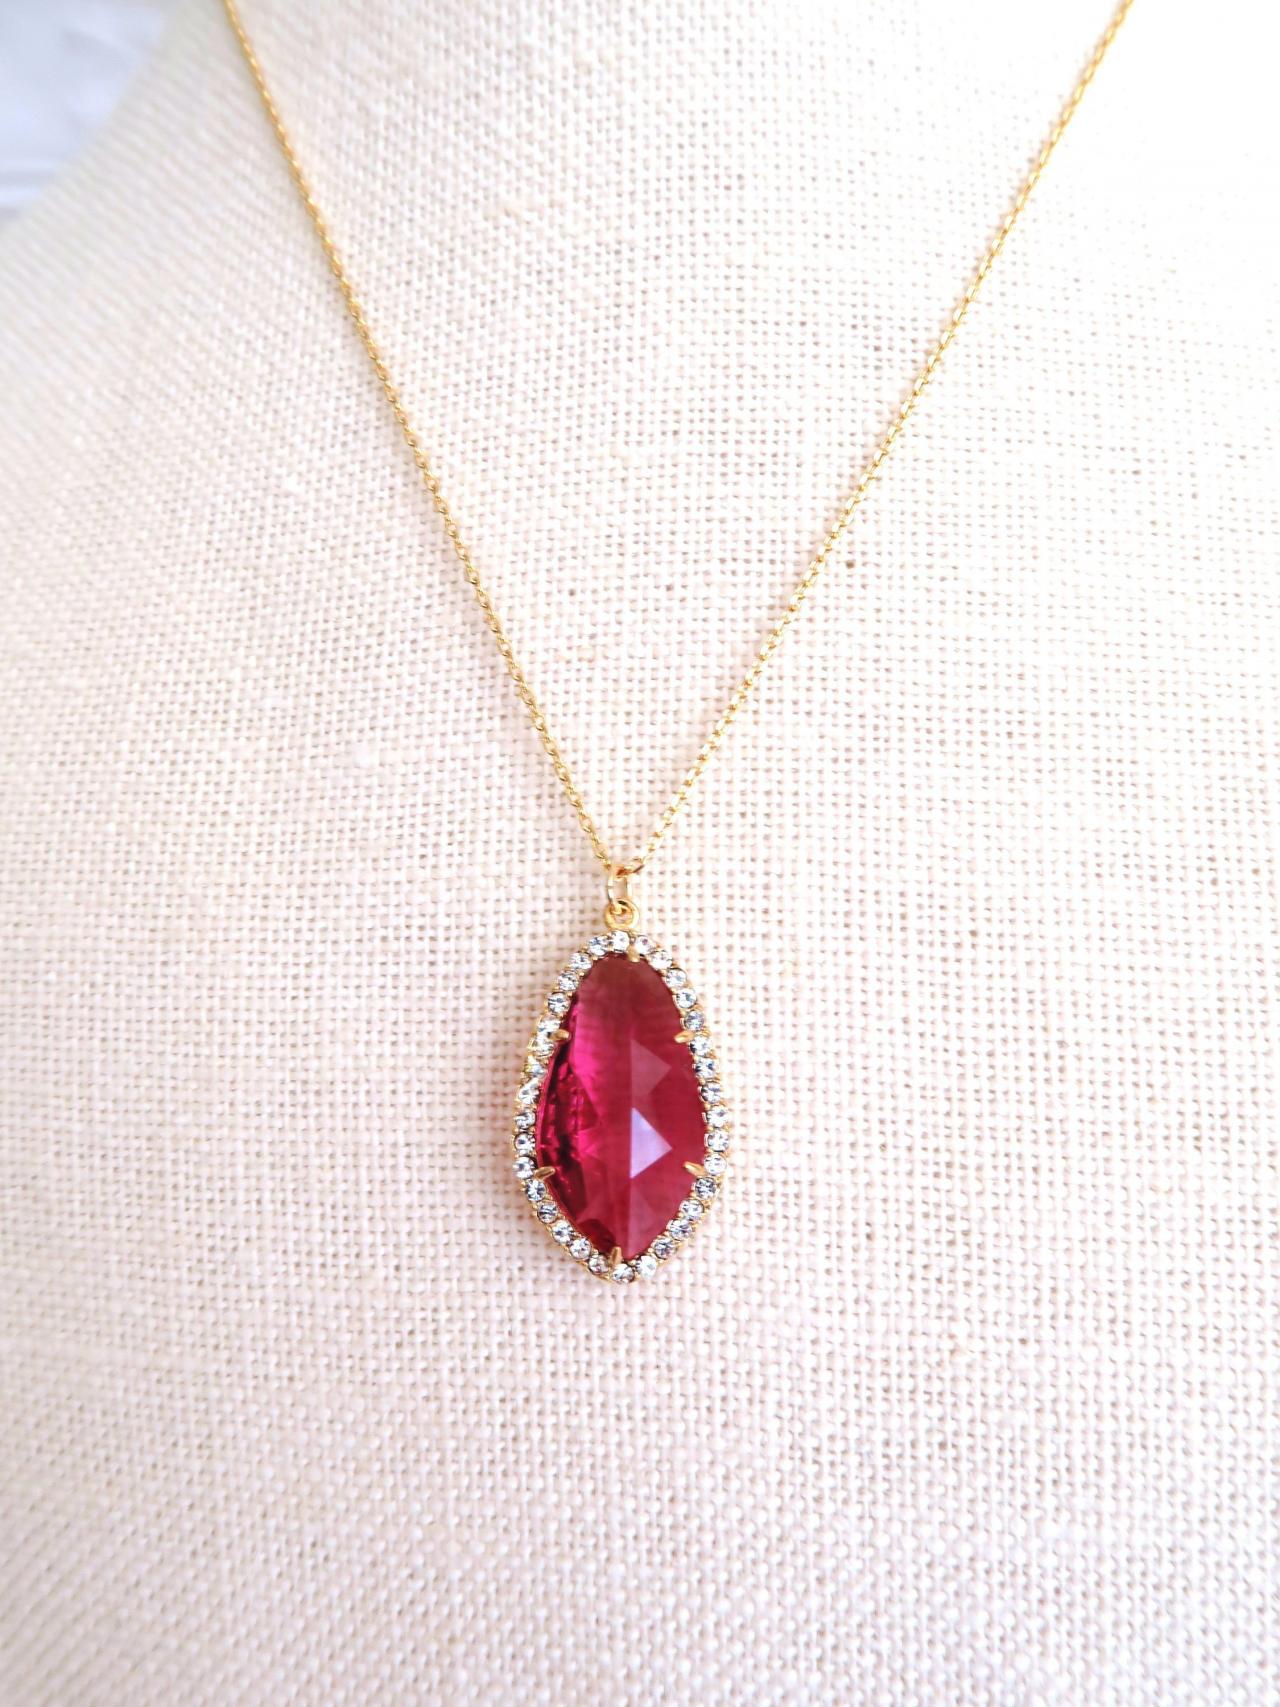 Ruby Red Teardrop Necklace Crystal Charm Necklace Wedding Bridal Pendant Bridesmaids Gift Birthday Gift Valentine's Day (N013)